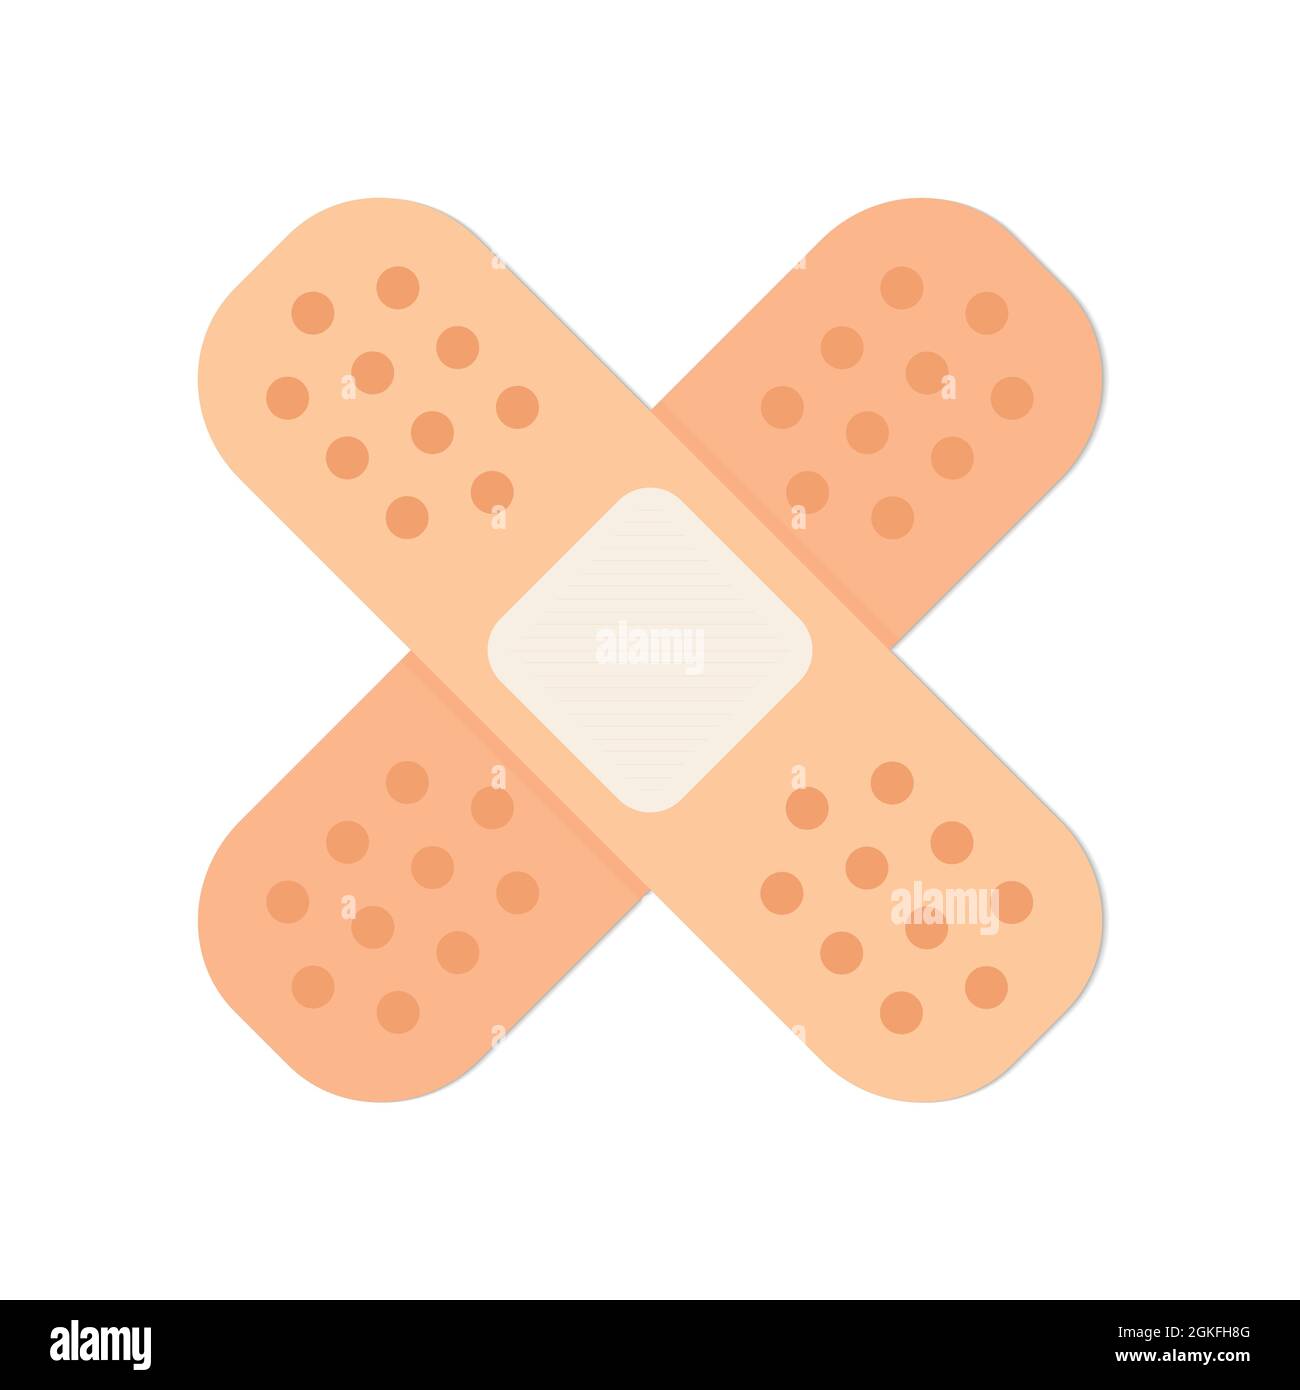 Isolated band aid or sticking plaster vector icon. Crossed adhesive bandage. Flat design illustration against white background. Stock Vector